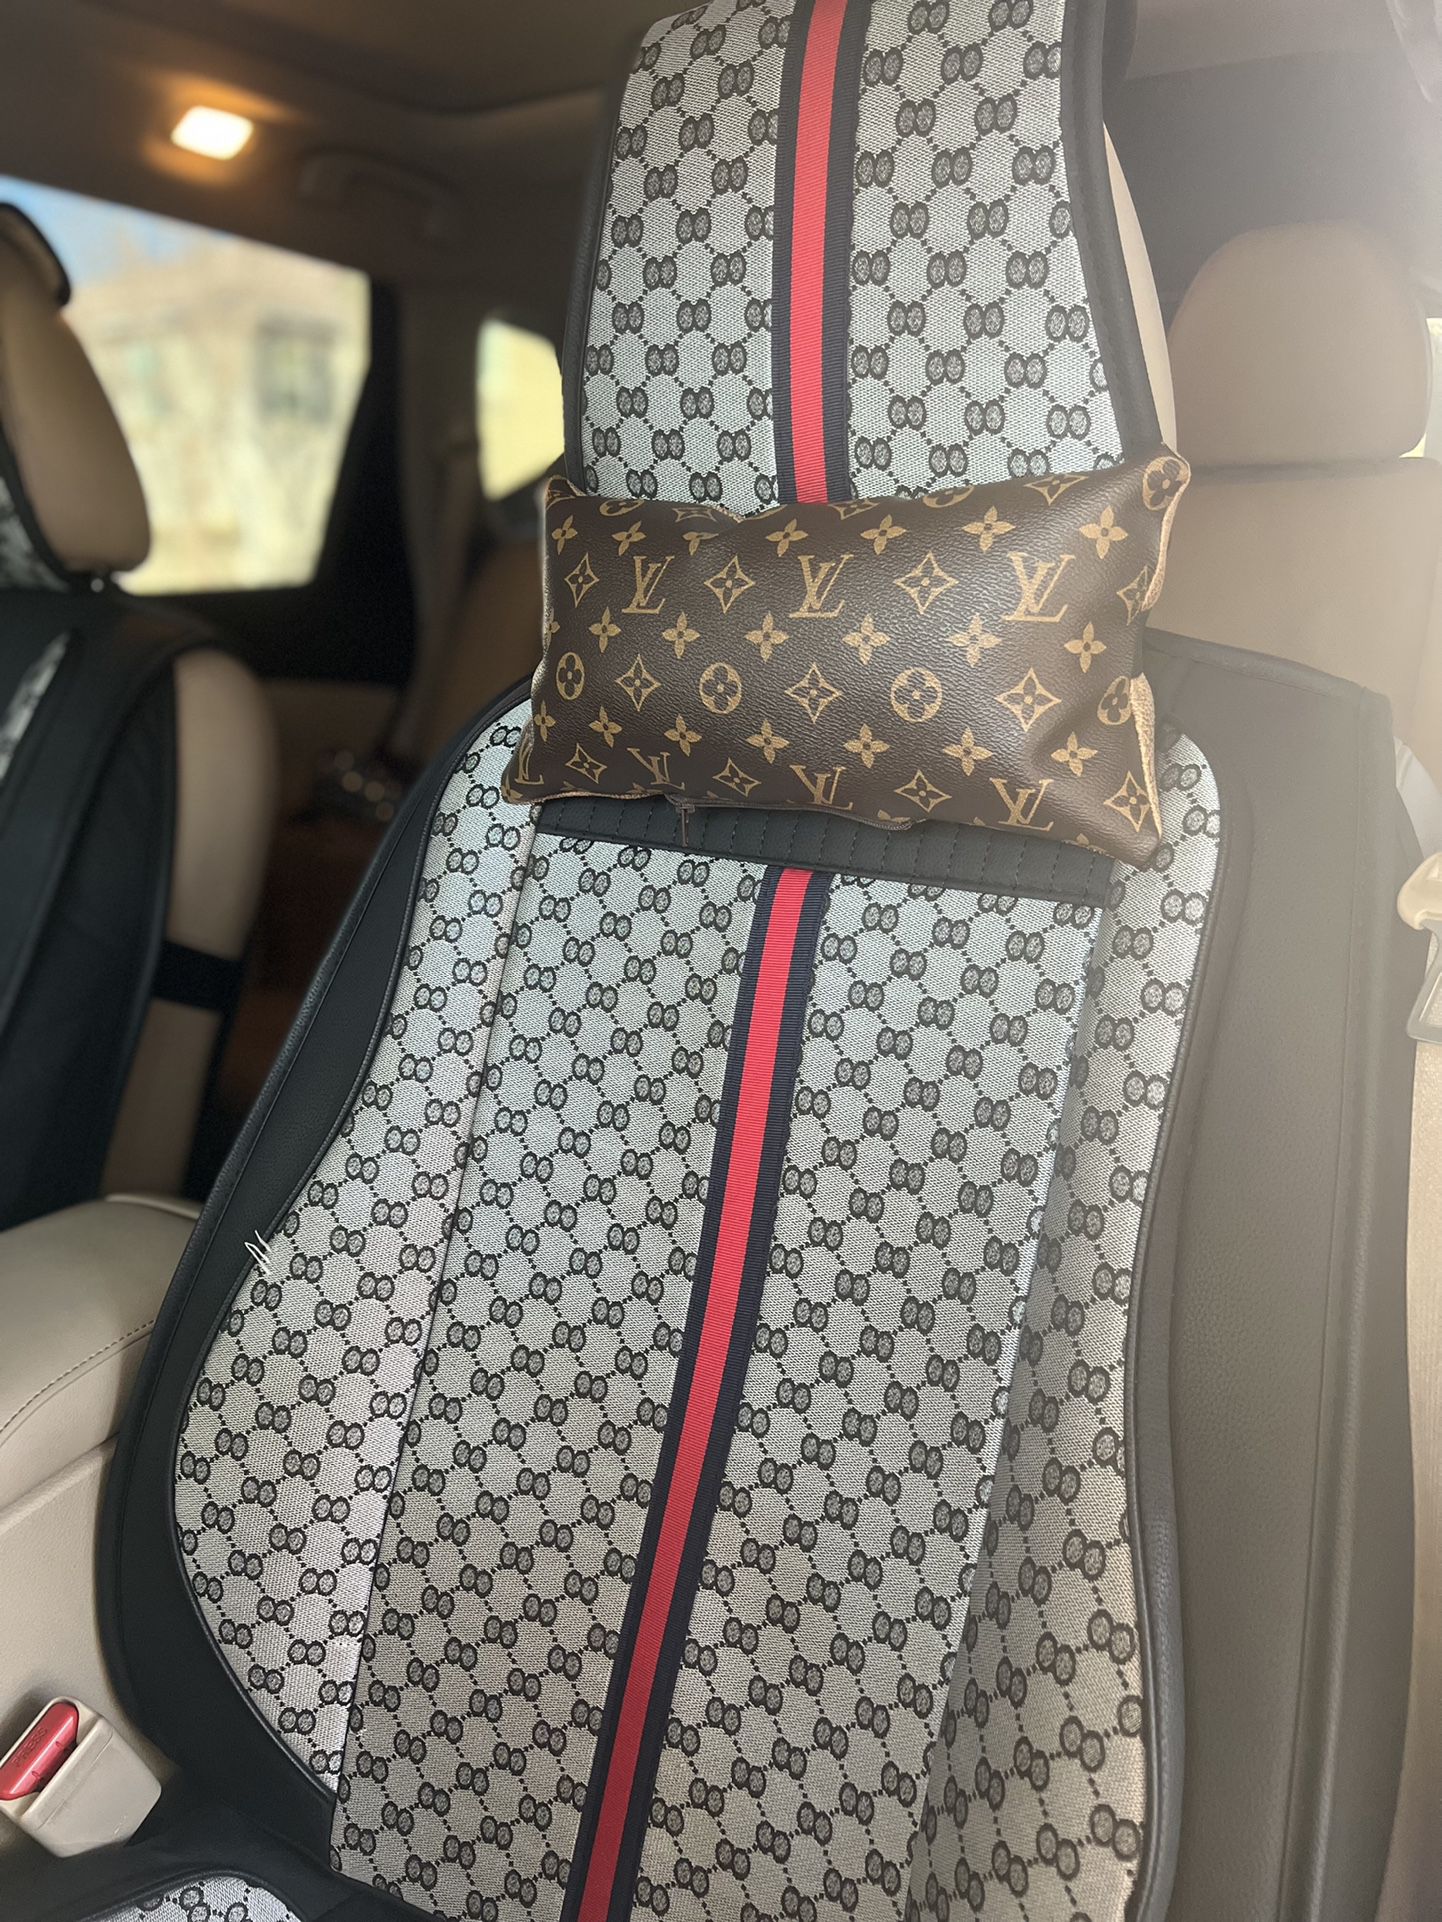 Louis Vuitton Car Pillow for Sale in Queens, NY - OfferUp